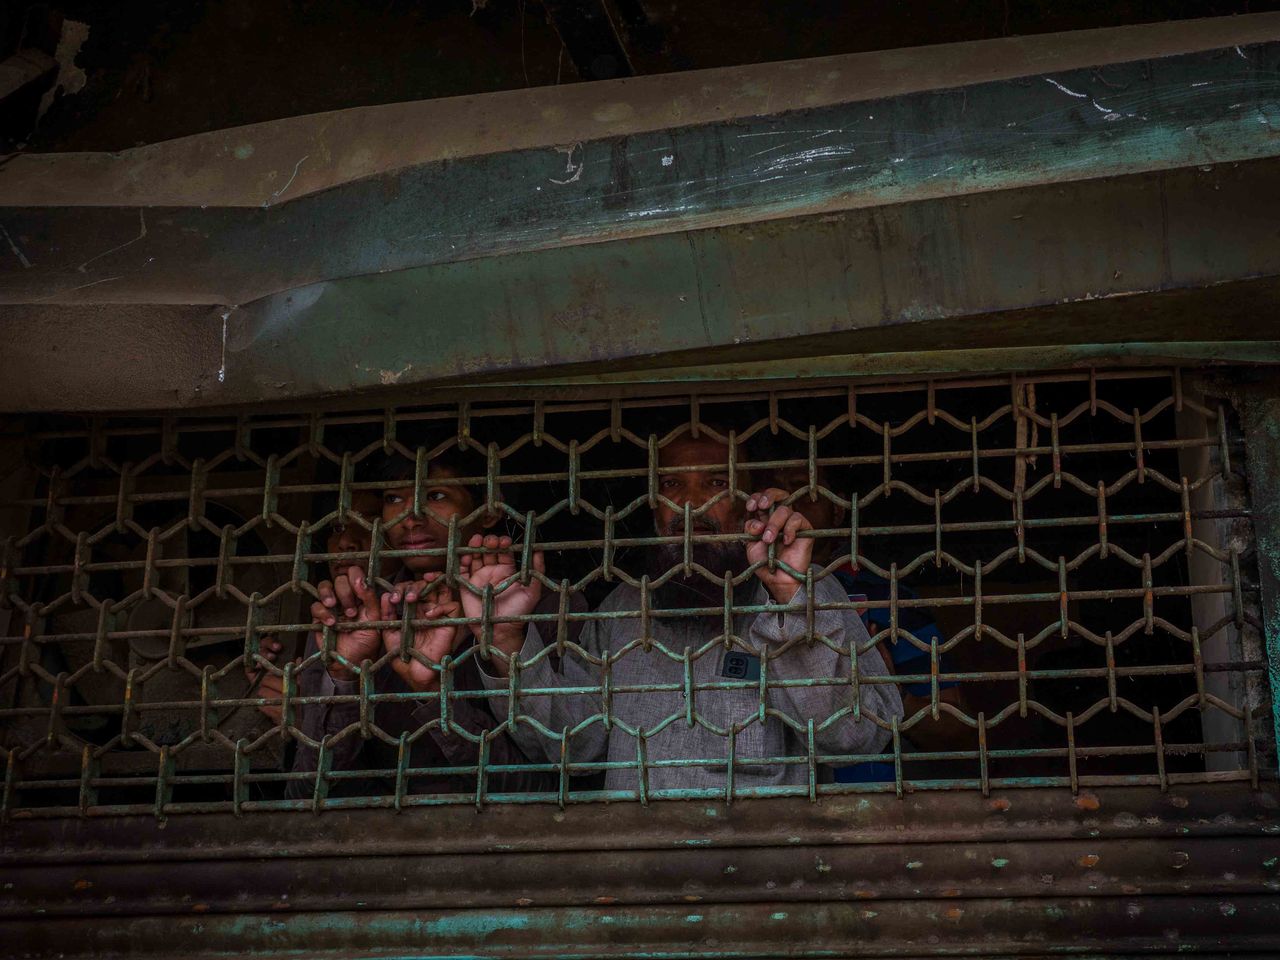 Agitated residents peep from inside a closed shutter of a damaged shop during an ongoing demolition drive against encroachment as termed by the civic authorities who used bulldozers to raze properties at a communal clash affected neighbourhood in Jahangir Puri in New Delhi on April 20, 2022. Bulldozers continued razing property for nearly two hours after India's chief justice issued an order to halt.